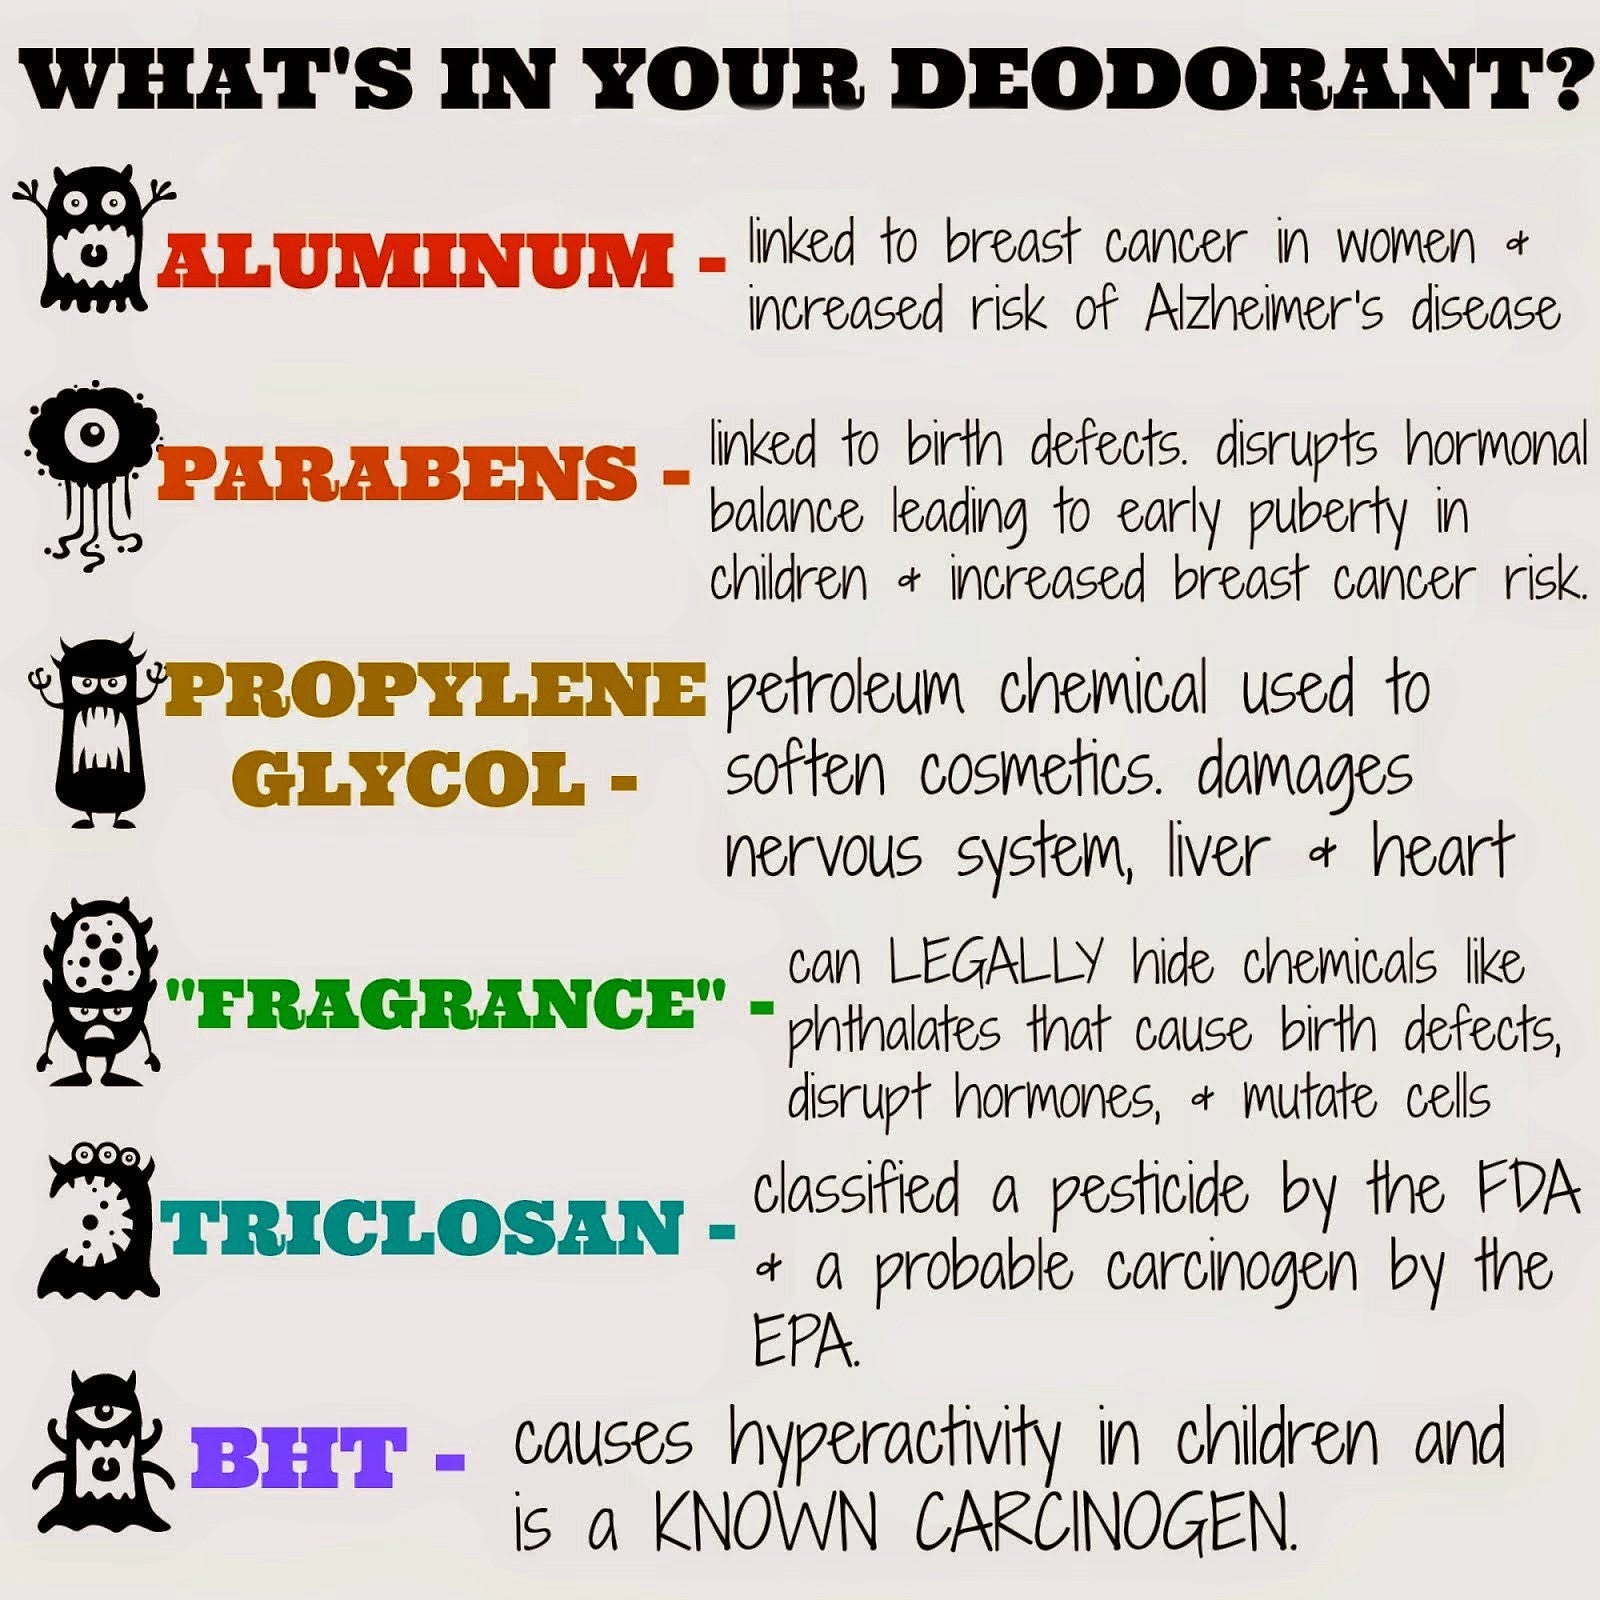 Dangerous Deodorant Ingredients May be Killing You. Here's Why...